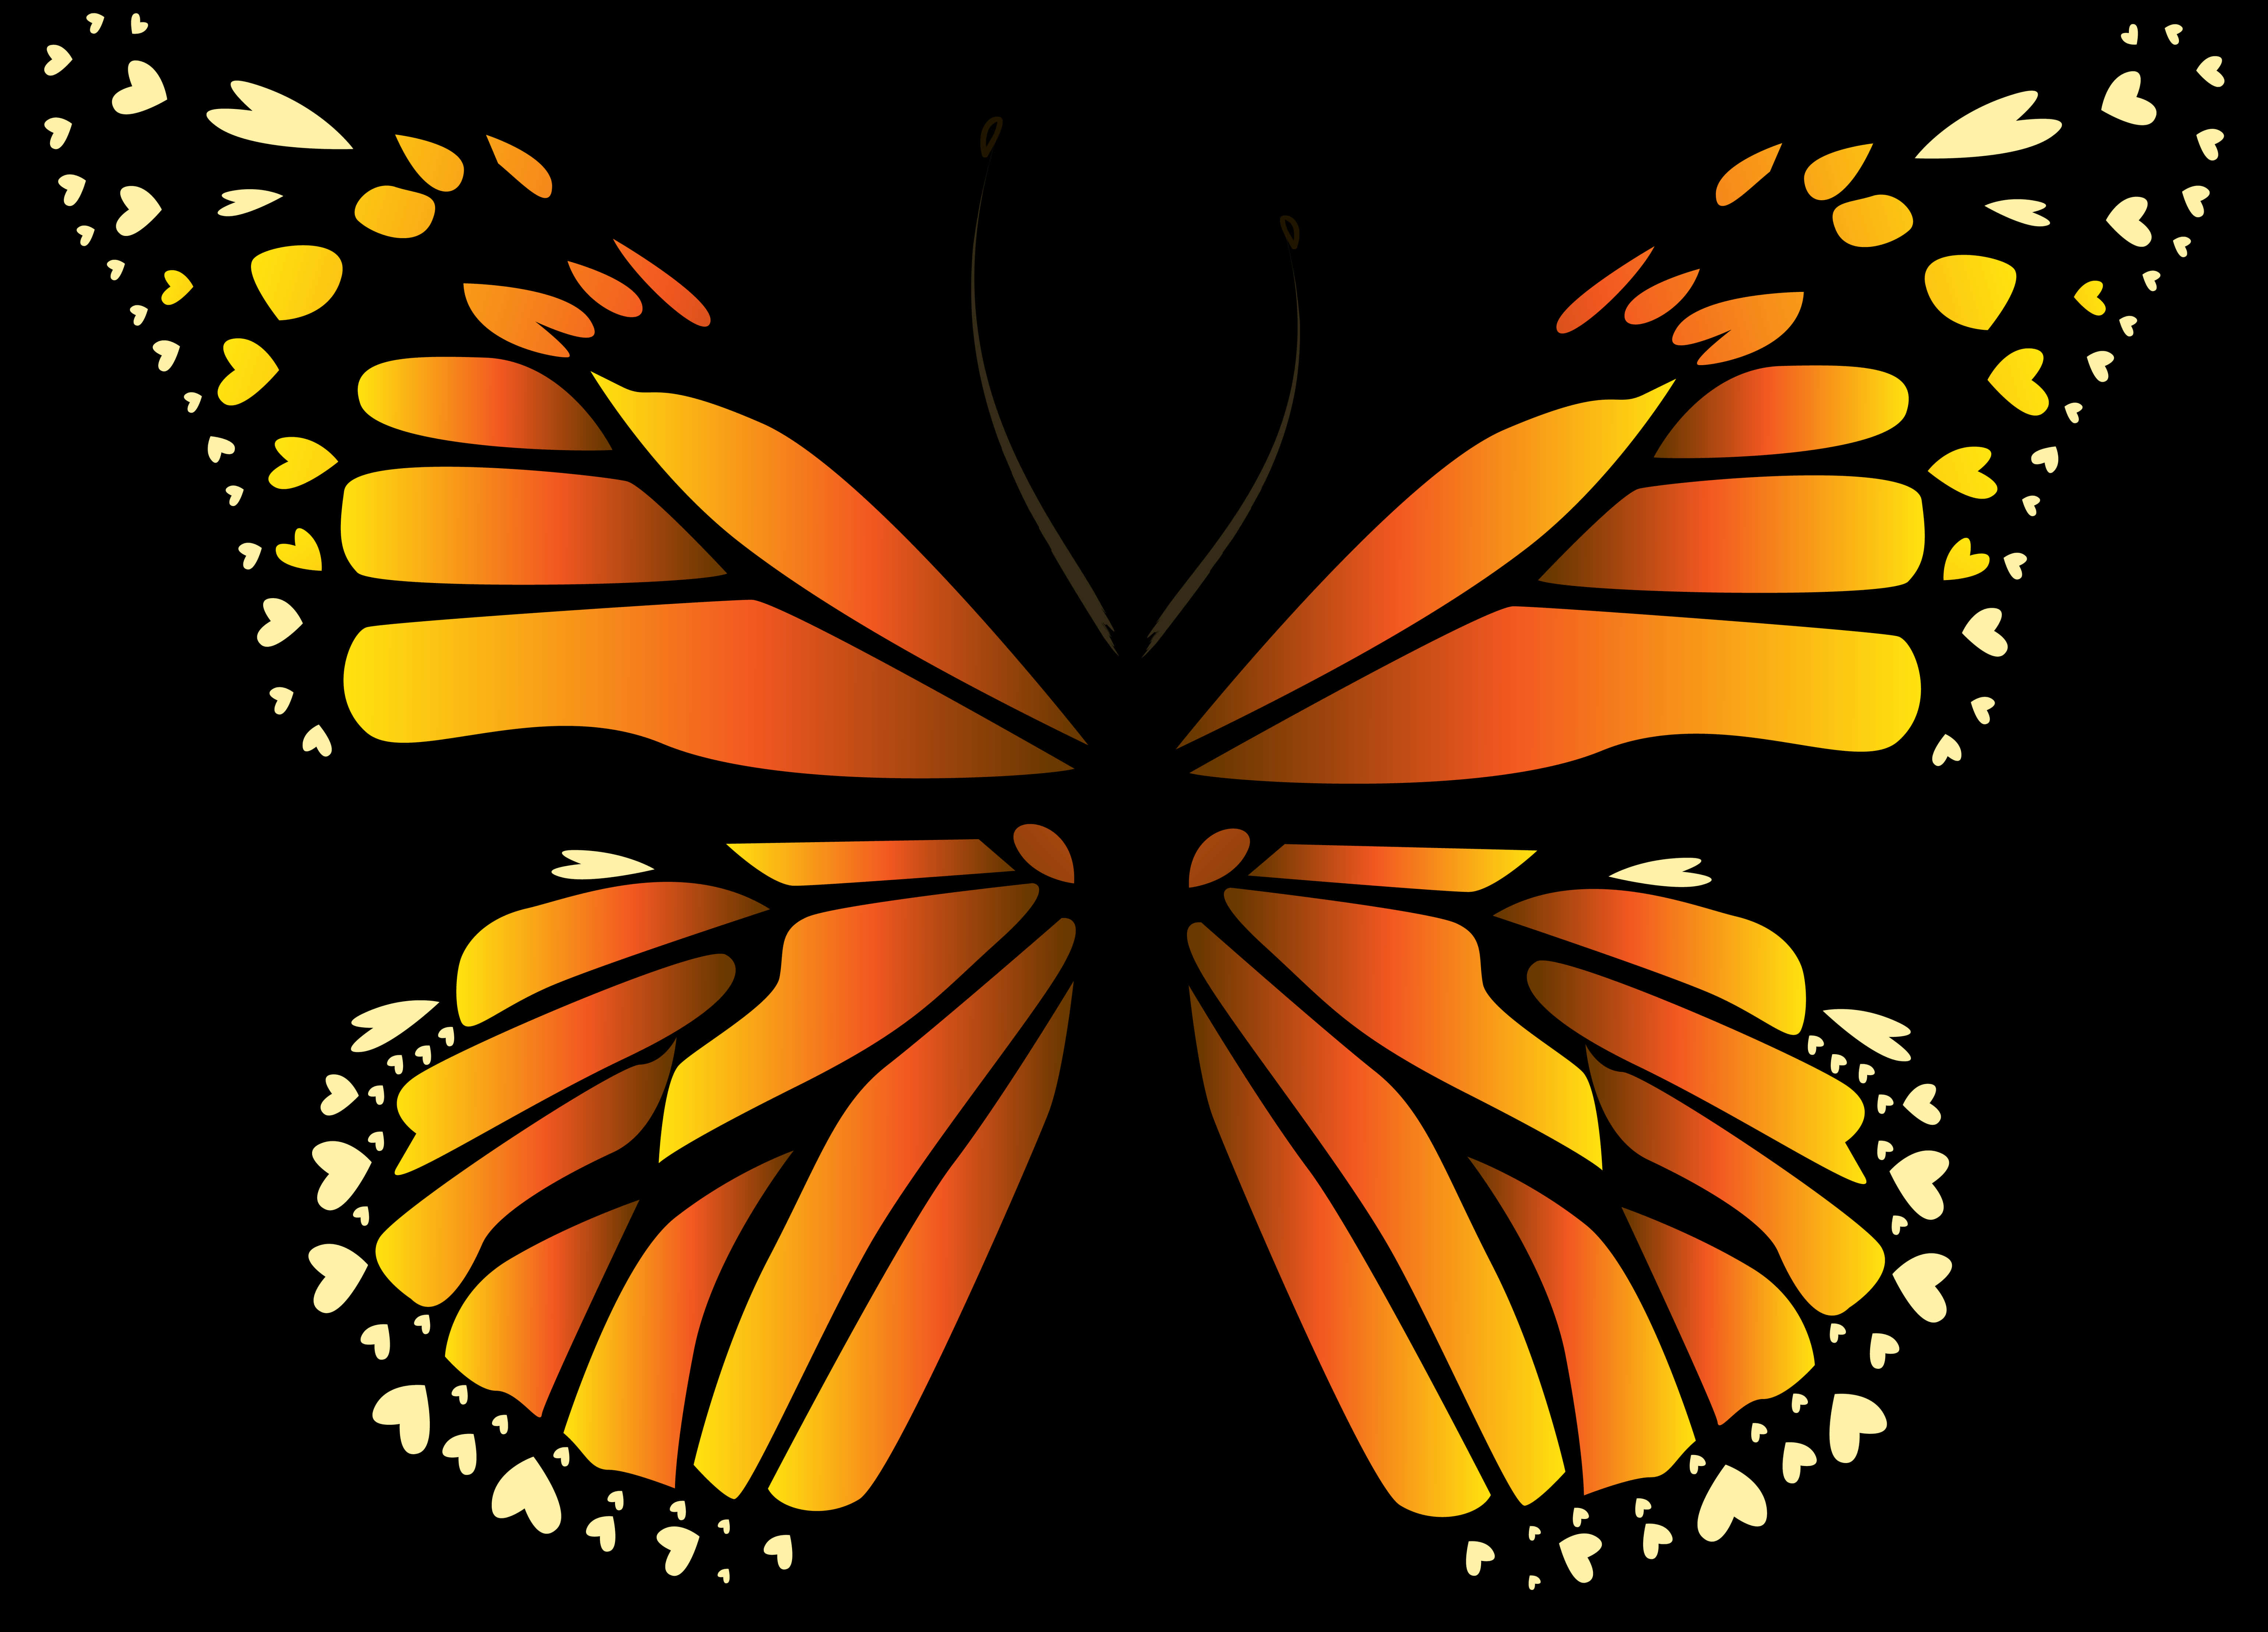 Monarch Butterfly Vector Art PNG image